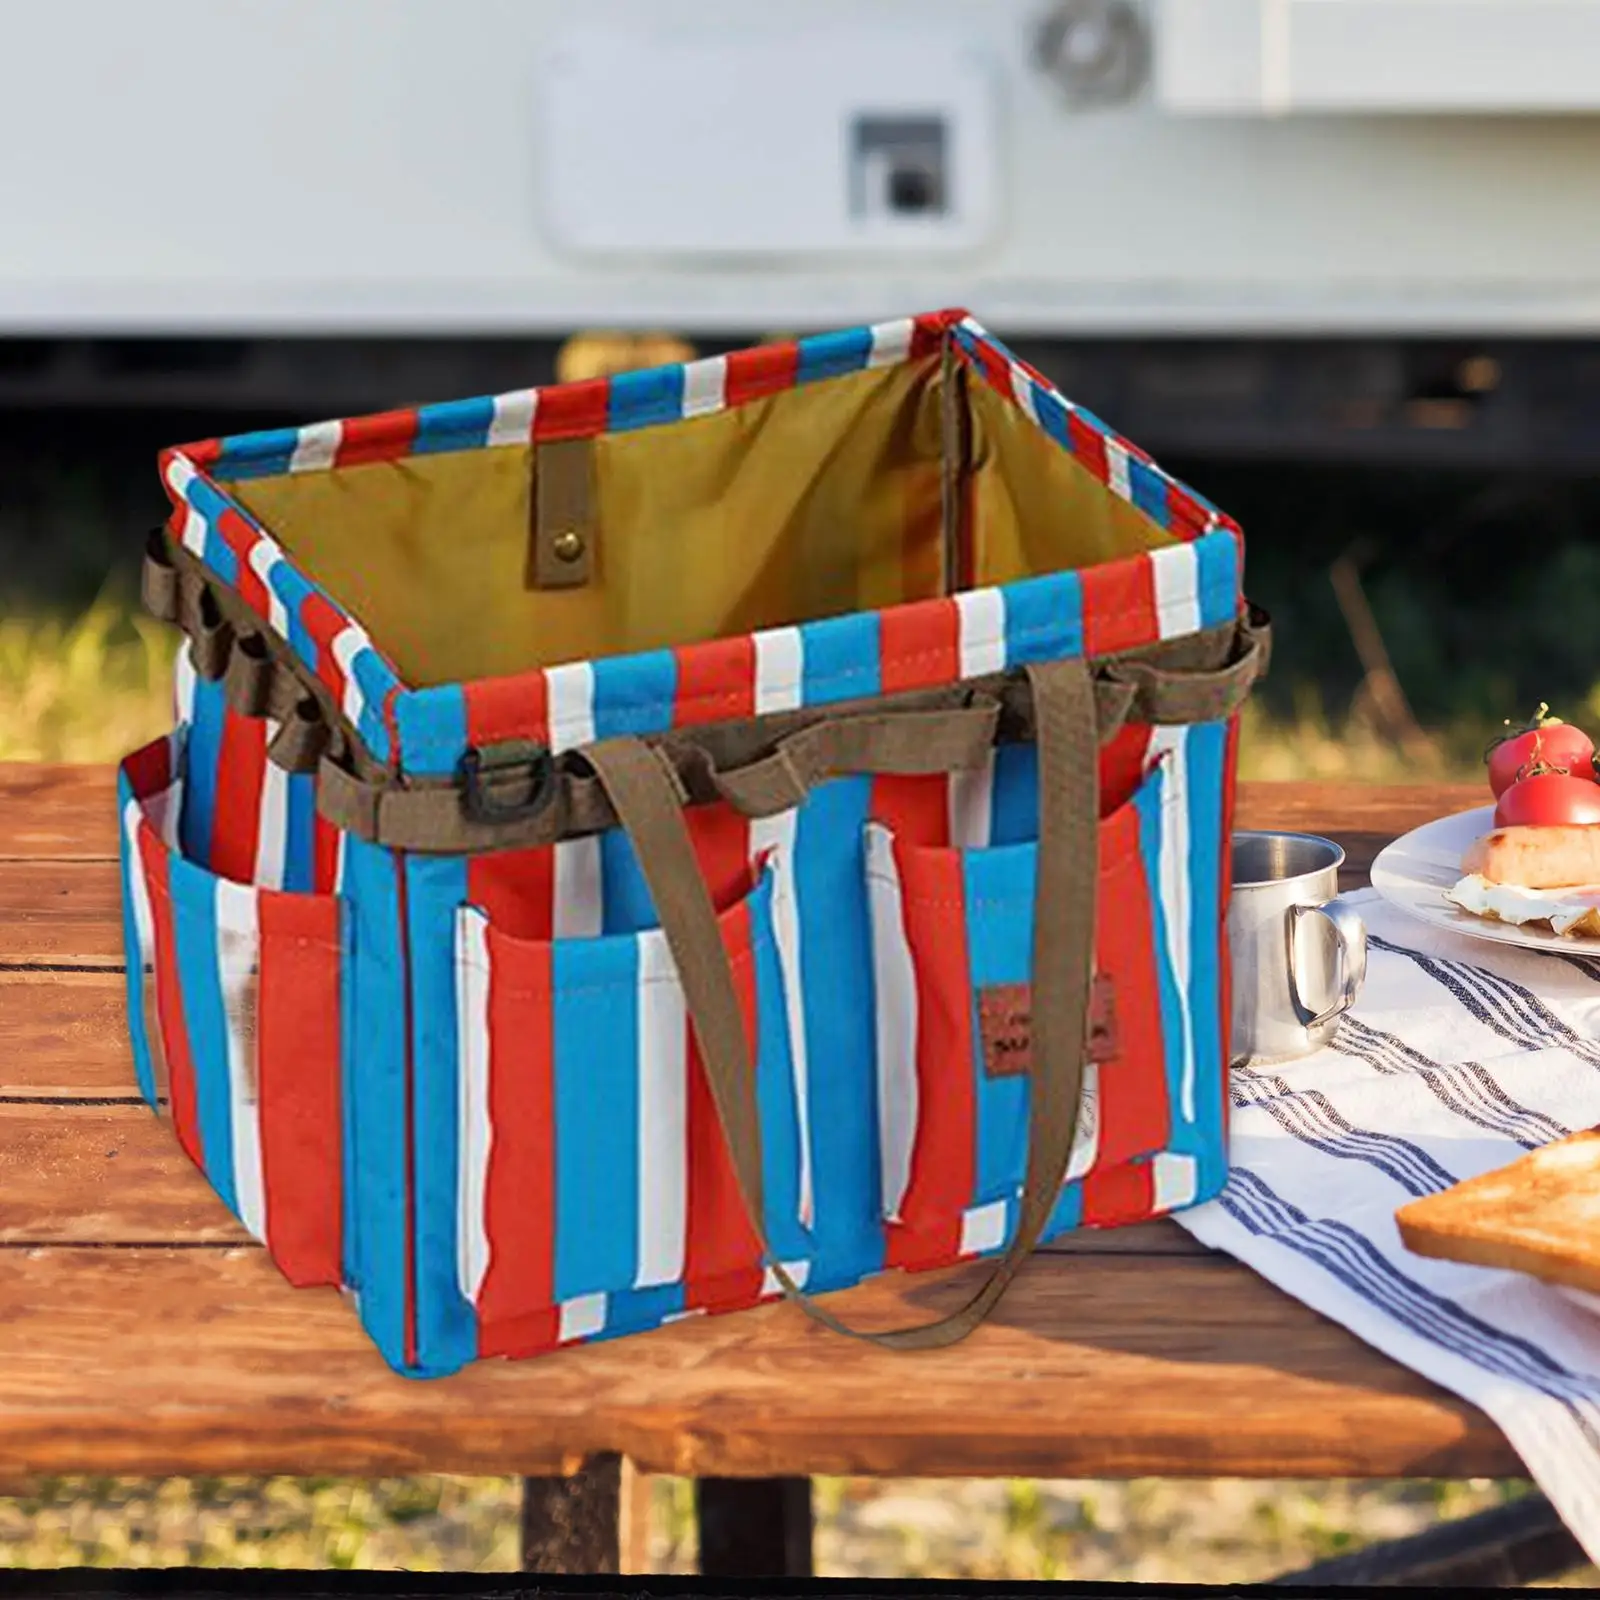 Reusable Utility Tote Tool Organizer Cooking Barbecue Camping Storage Bag